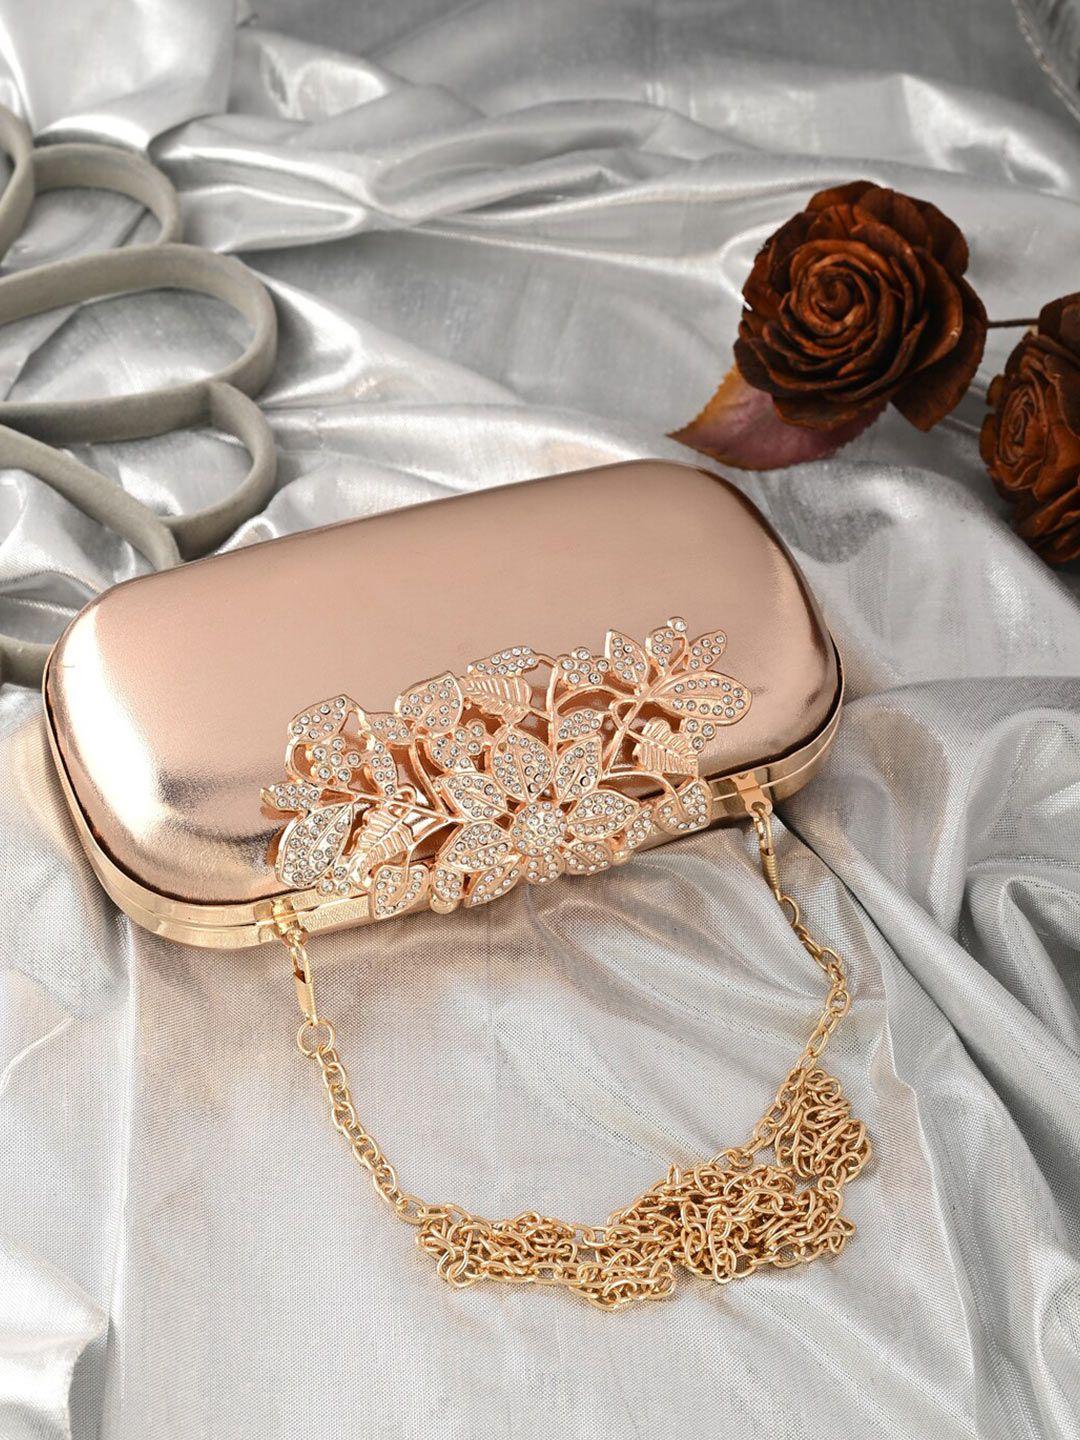 toobacraft pink & gold-toned embellished box clutch